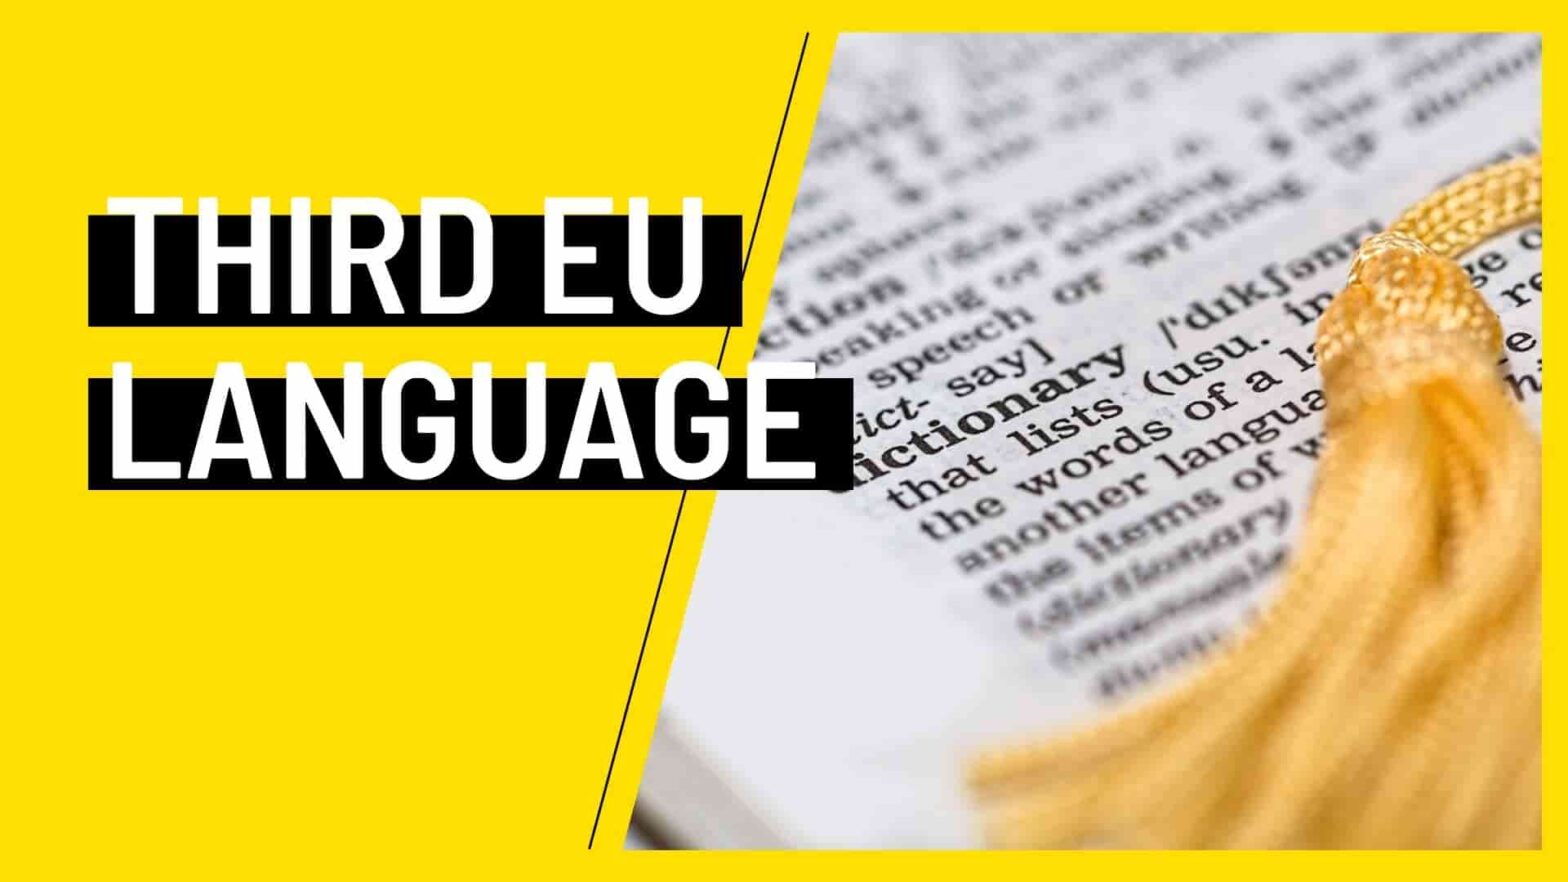 Explainer on ‘Working knowledge of a third EU language’